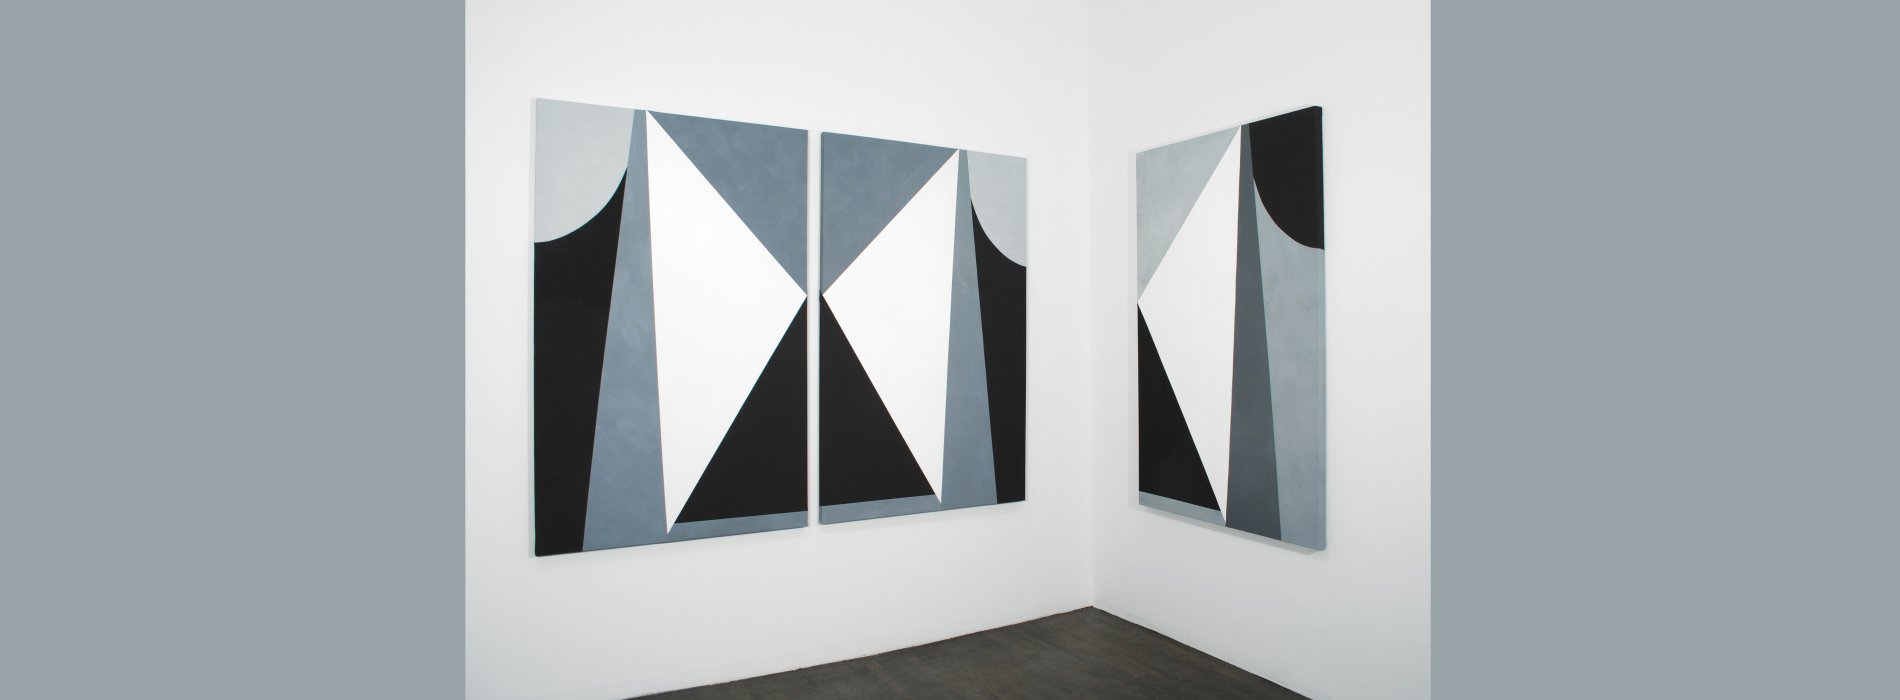  Sarah Crowner Untitled, 2011 Gouache on sewn canvas Diptych: Each panel 58 x 36 inches